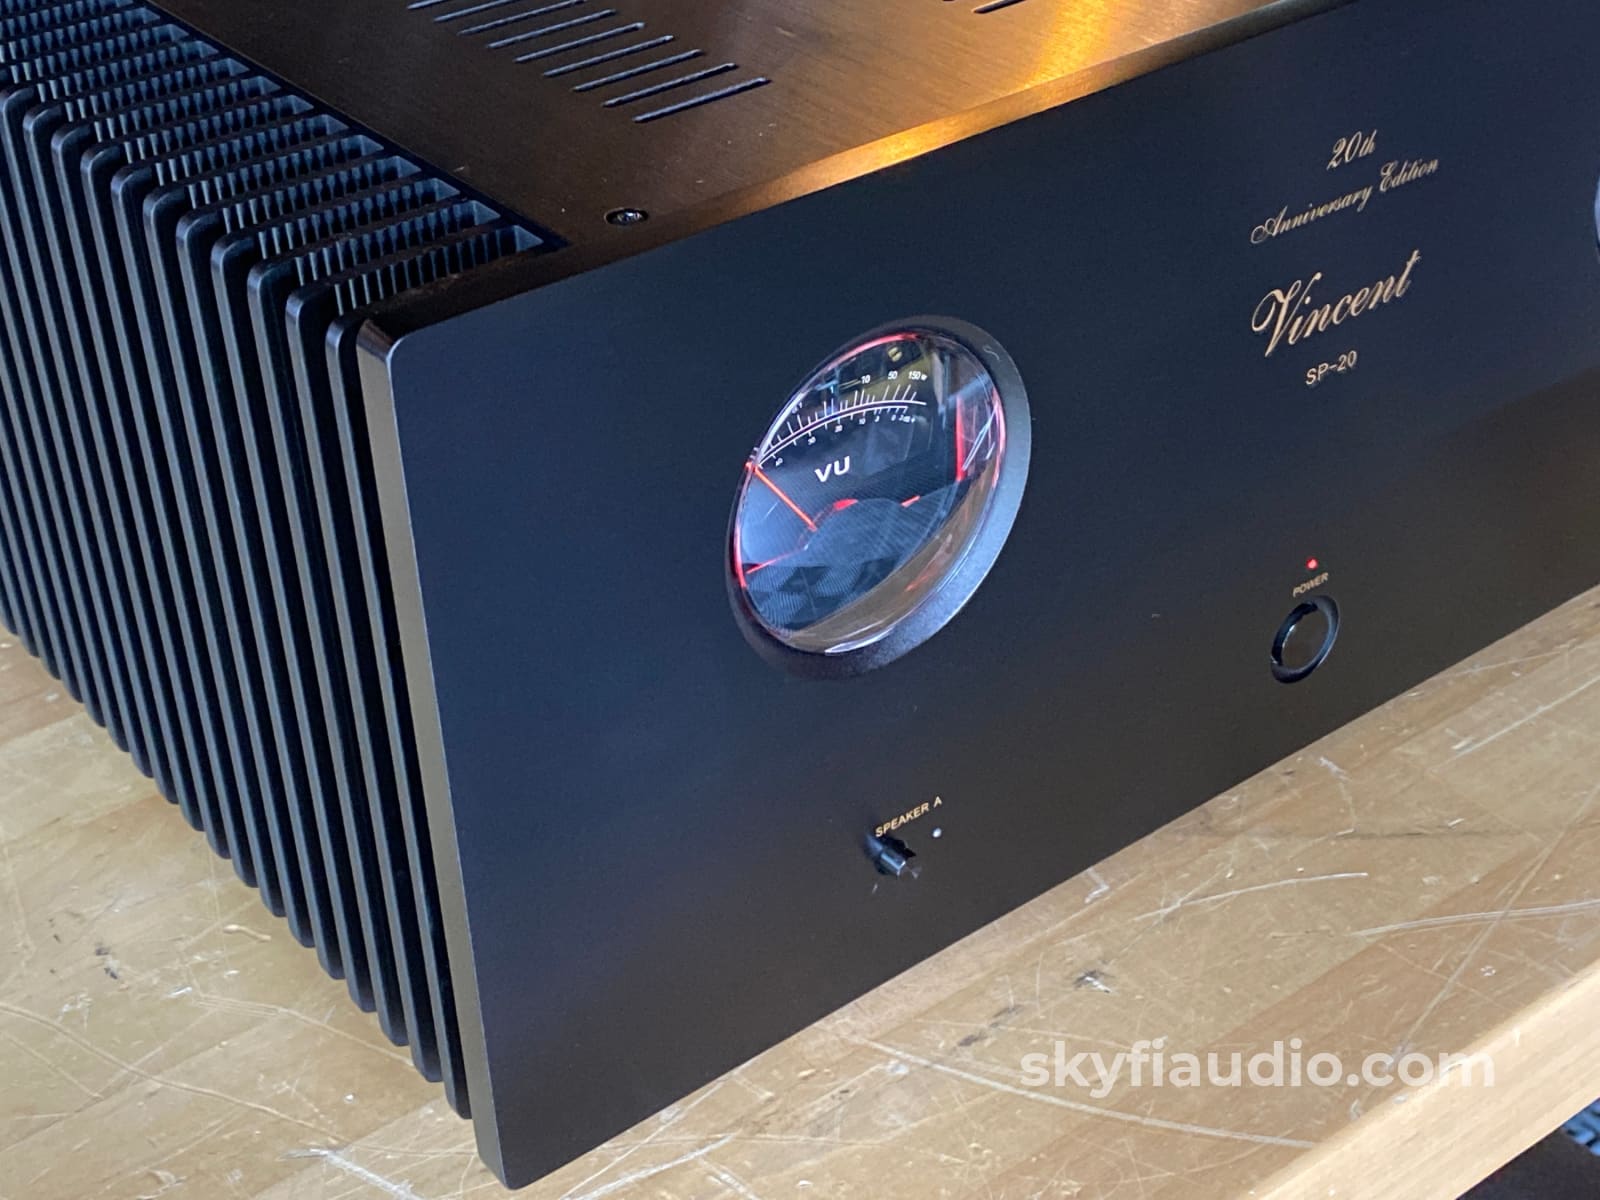 Vincent 20Th Anniversary Sp-20 - Tube Hybrid Amplifier W/150W